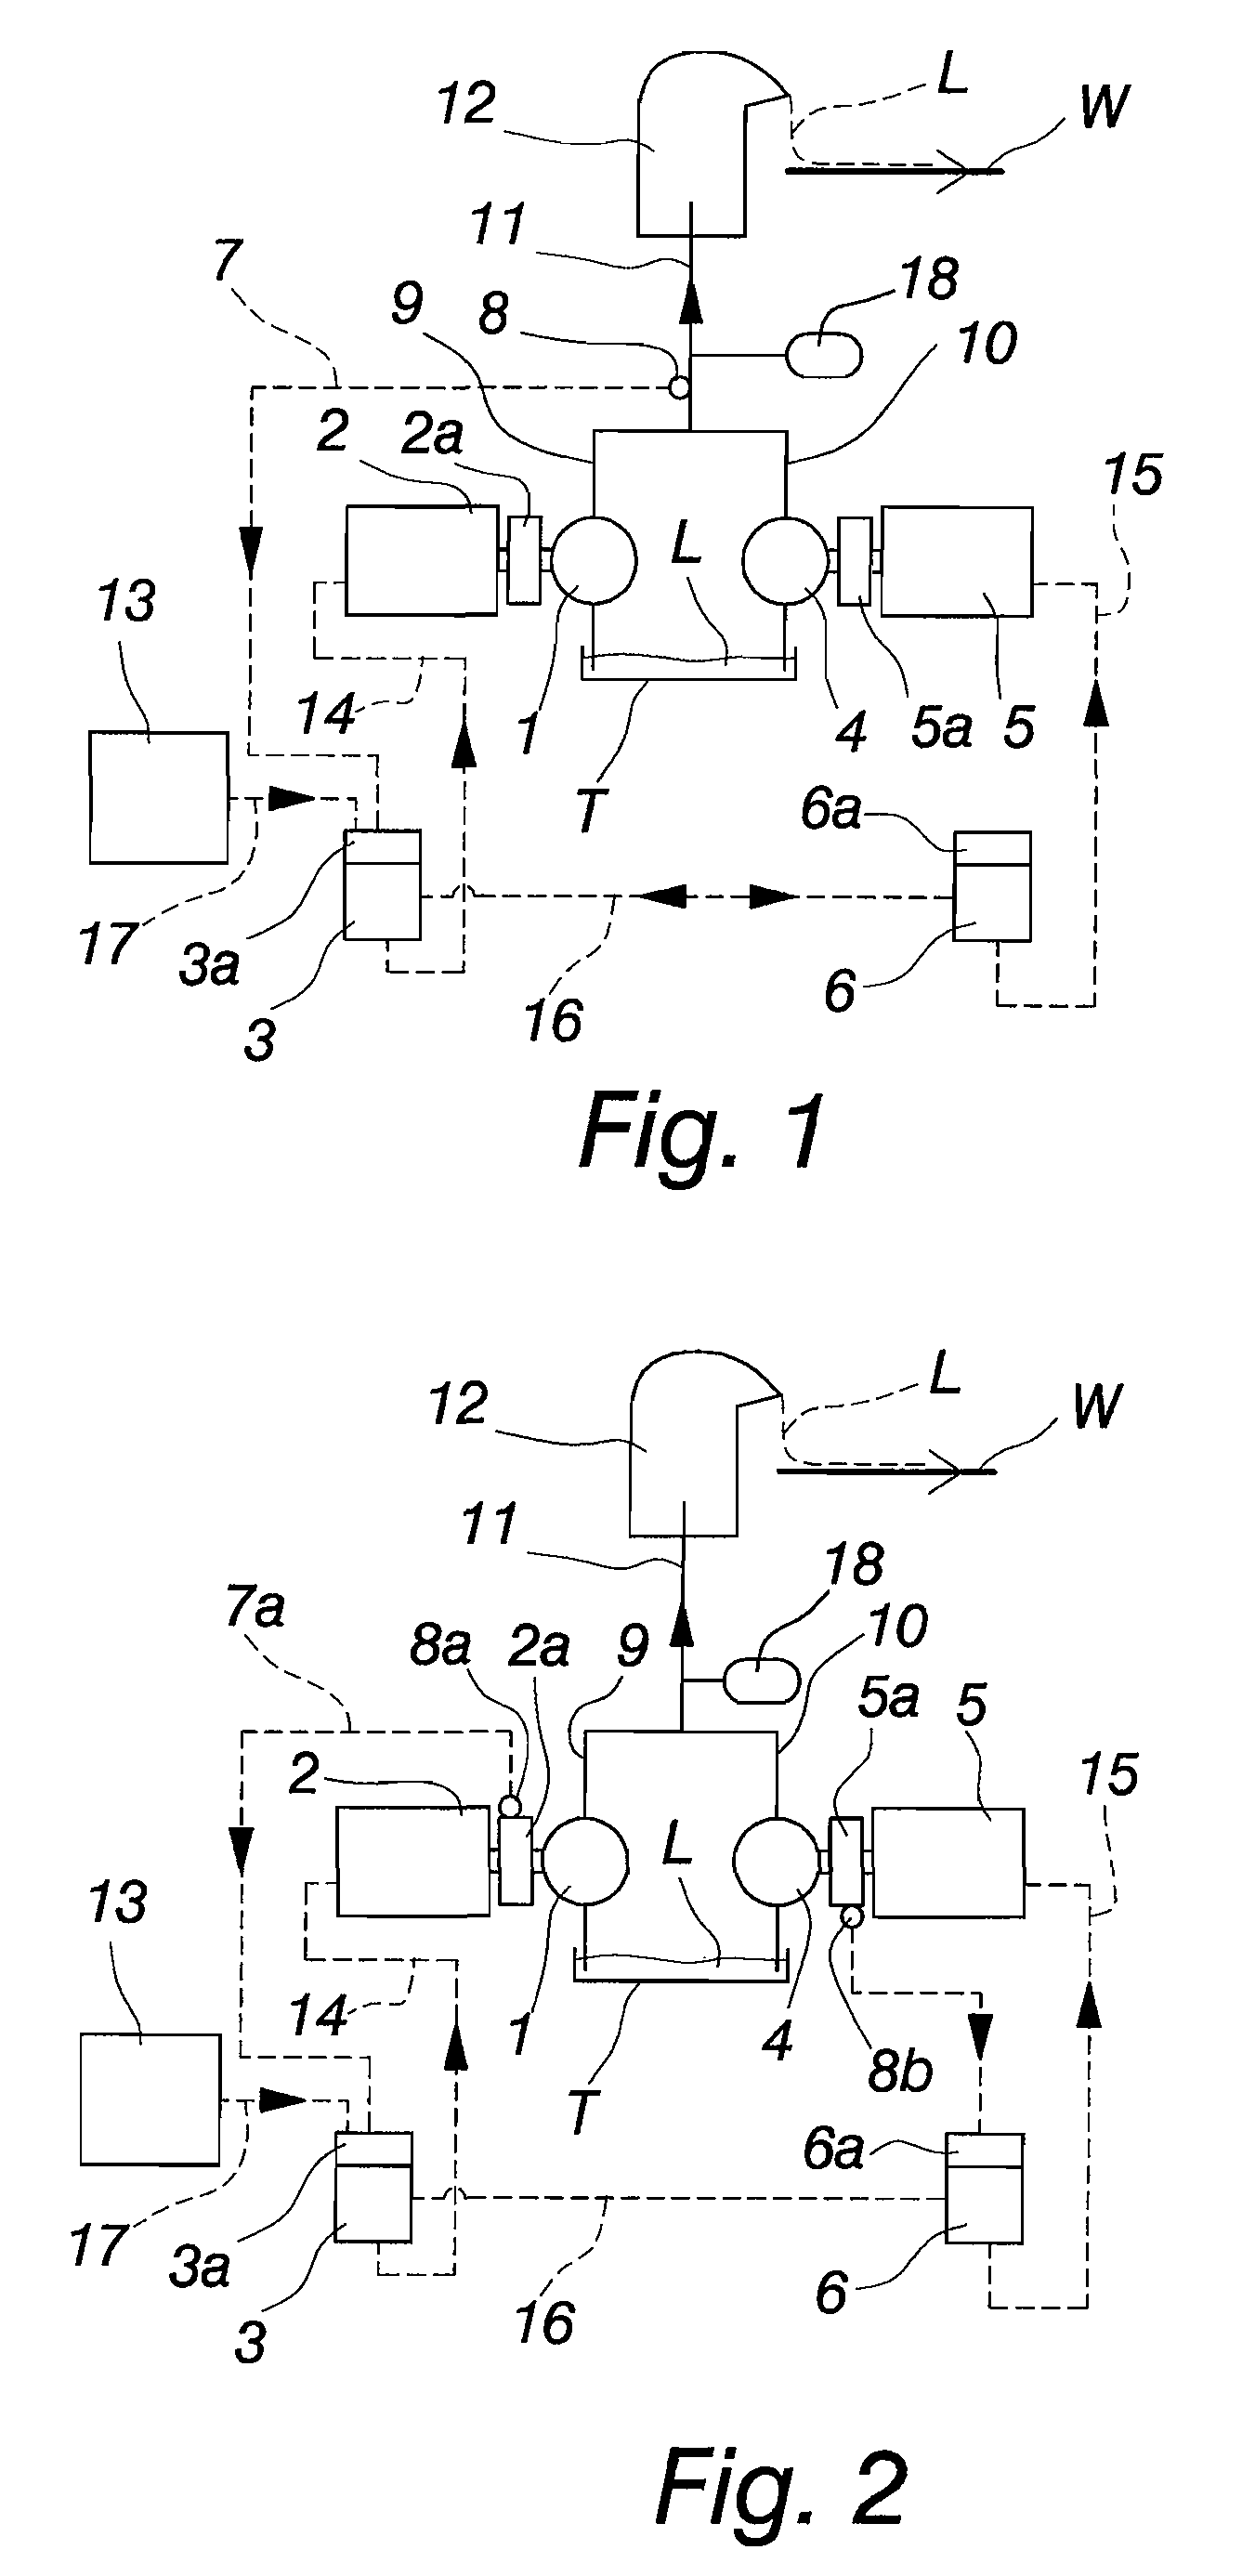 Method for Supplying a Chemical or Chemical Compound in a Fibrous Web Machine and an Apparatus for Implementing the Method